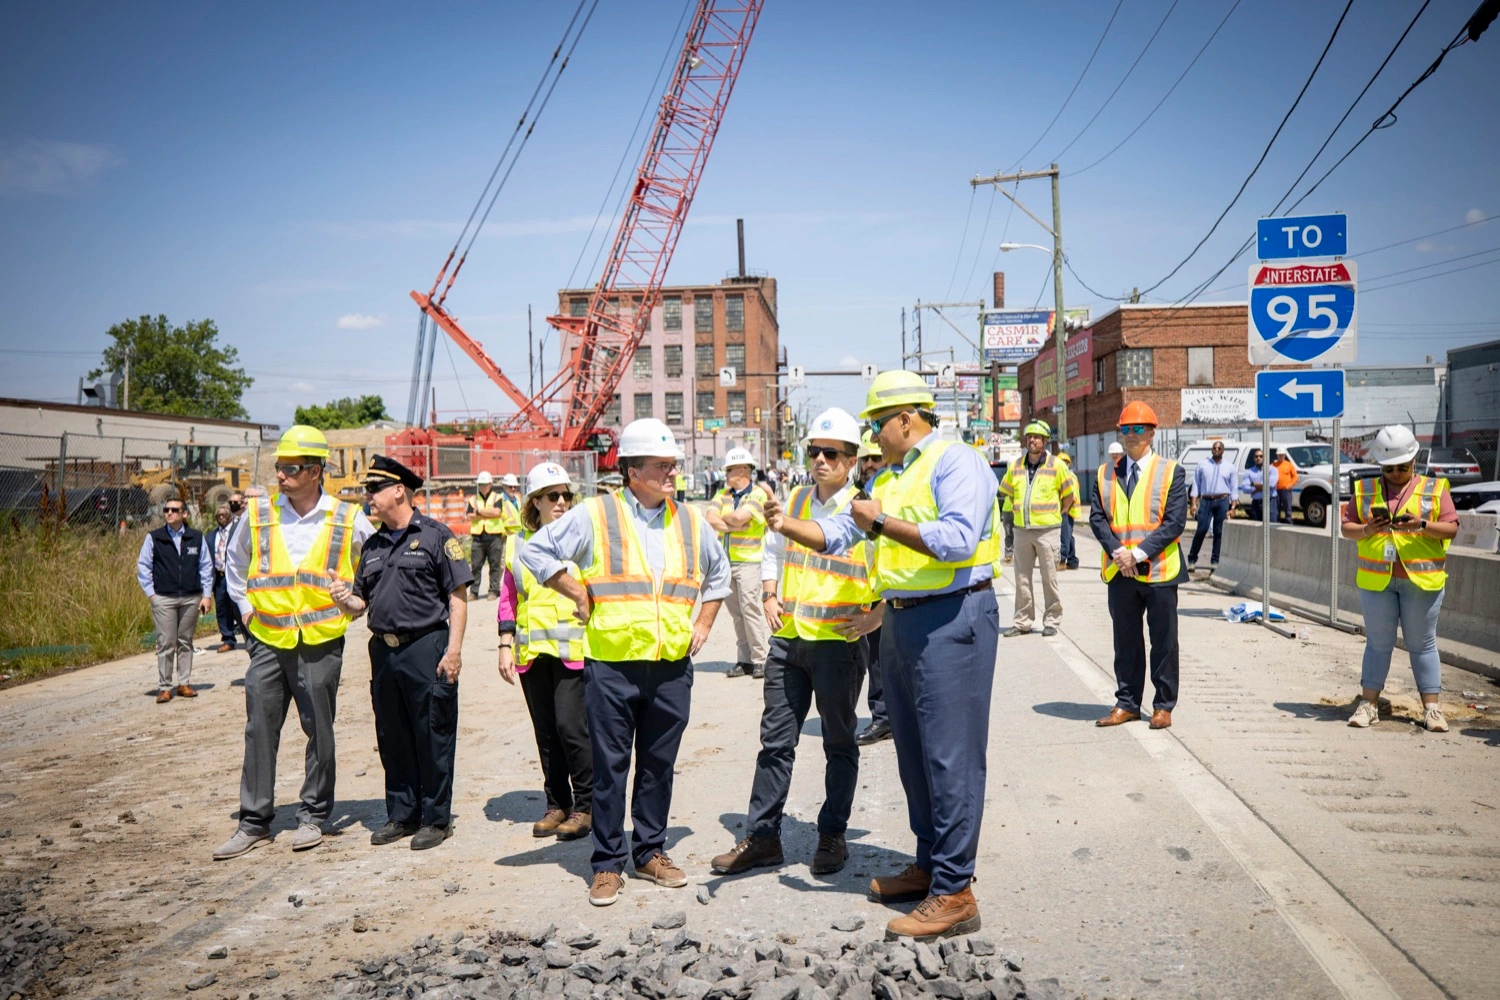 U.S. Transportation Secretary Pete Buttigieg, PennDOT Secretary Michael Carroll and other officials stand talking on a roadway wearing white hard hats and yellow safety vests with the red, blue and white I-95 Interstate sign and a large orange crane in the background